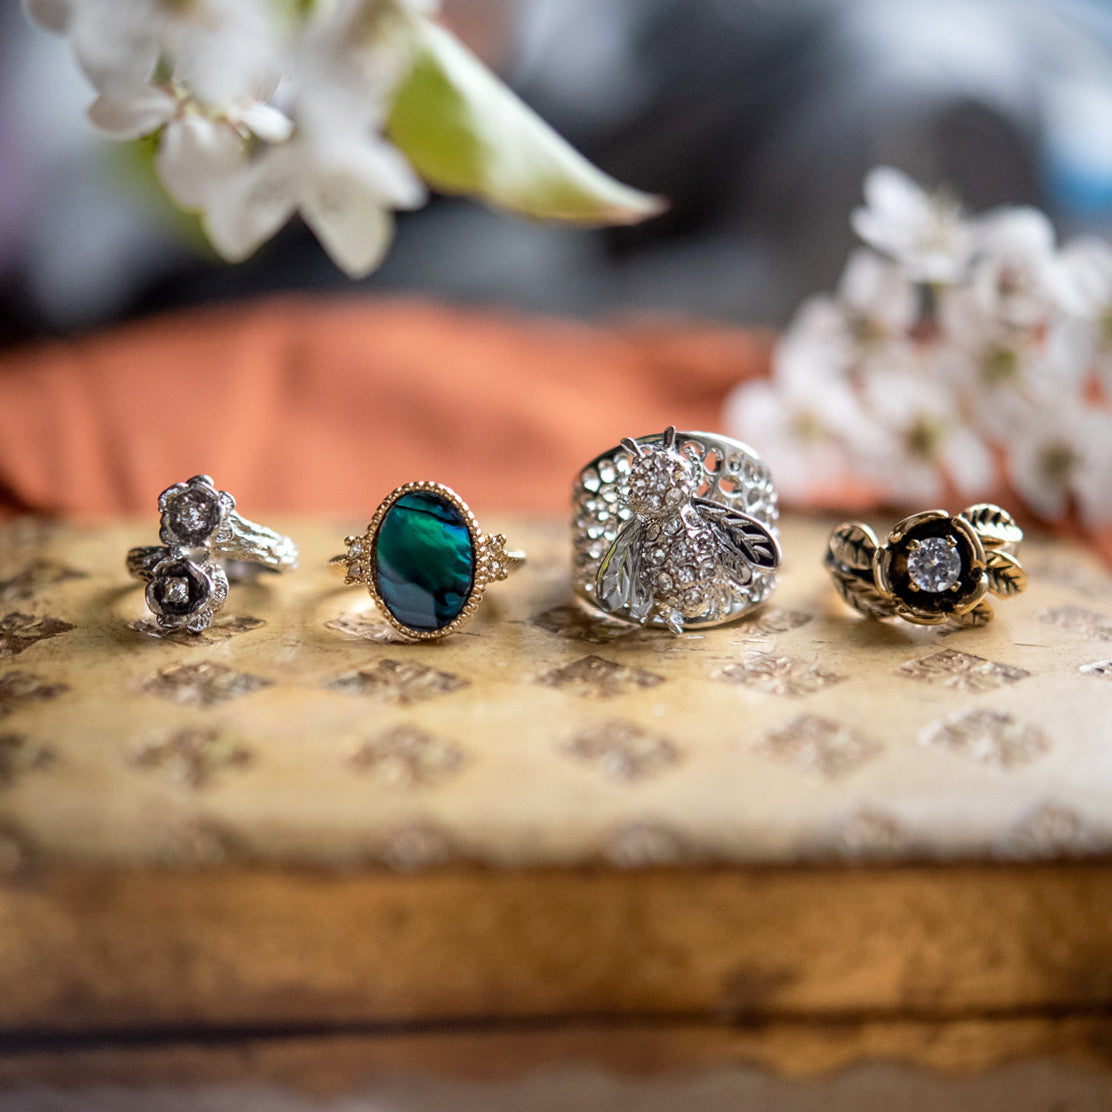 Is it worthwhile to purchase an antique or vintage engagement ring instead  of a new one? - Quora